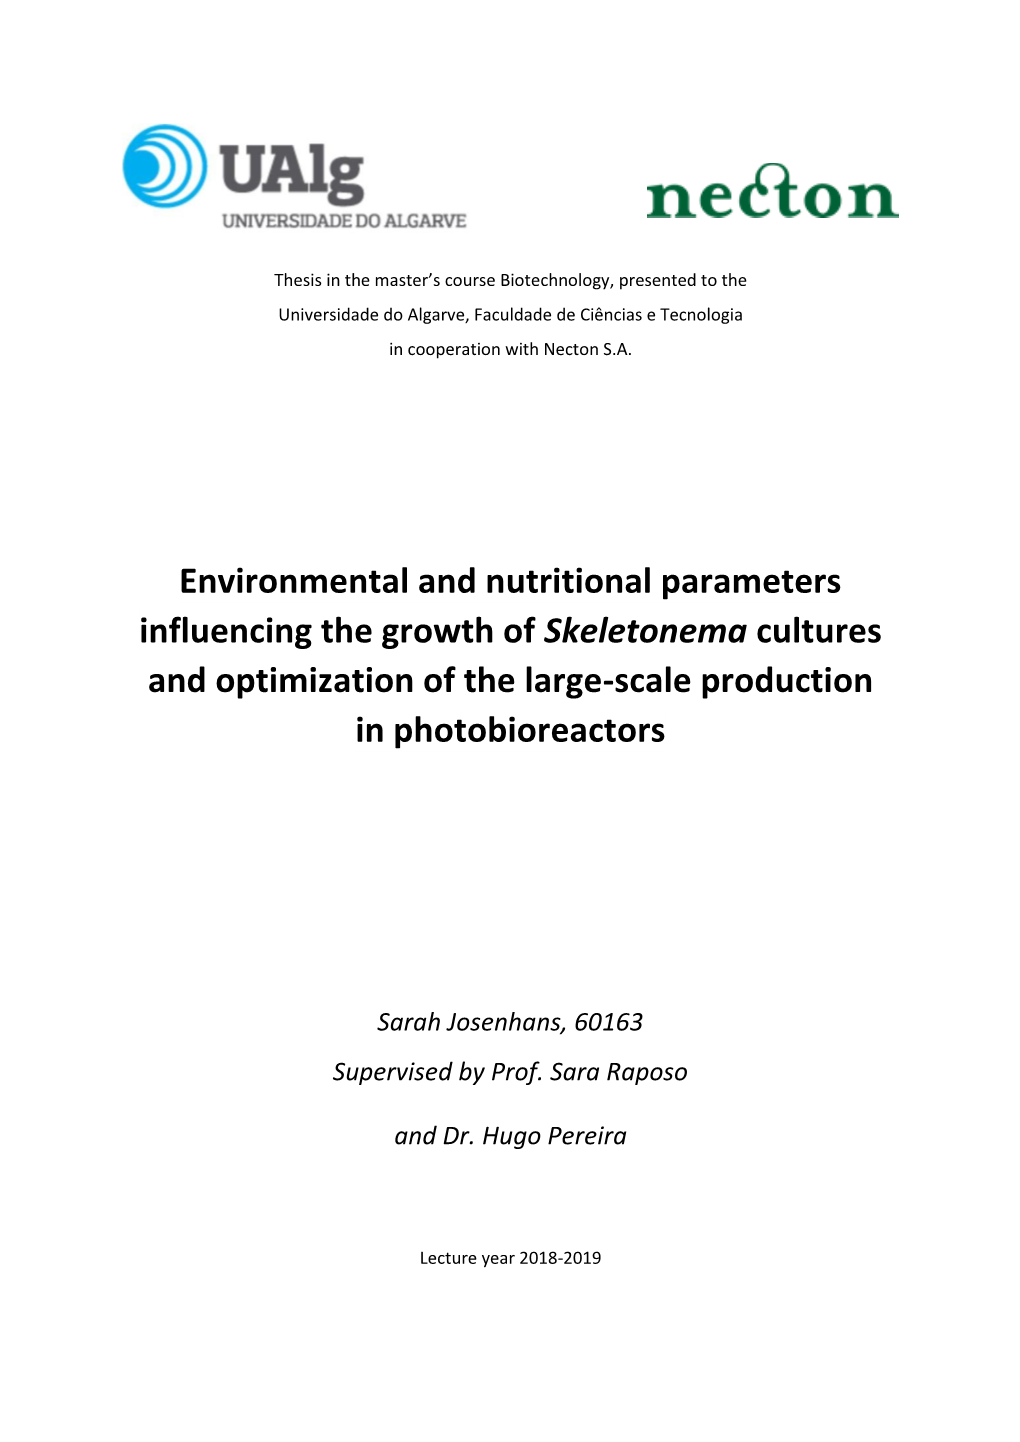 Environmental and Nutritional Parameters Influencing the Growth of Skeletonema Cultures and Optimization of the Large-Scale Production in Photobioreactors